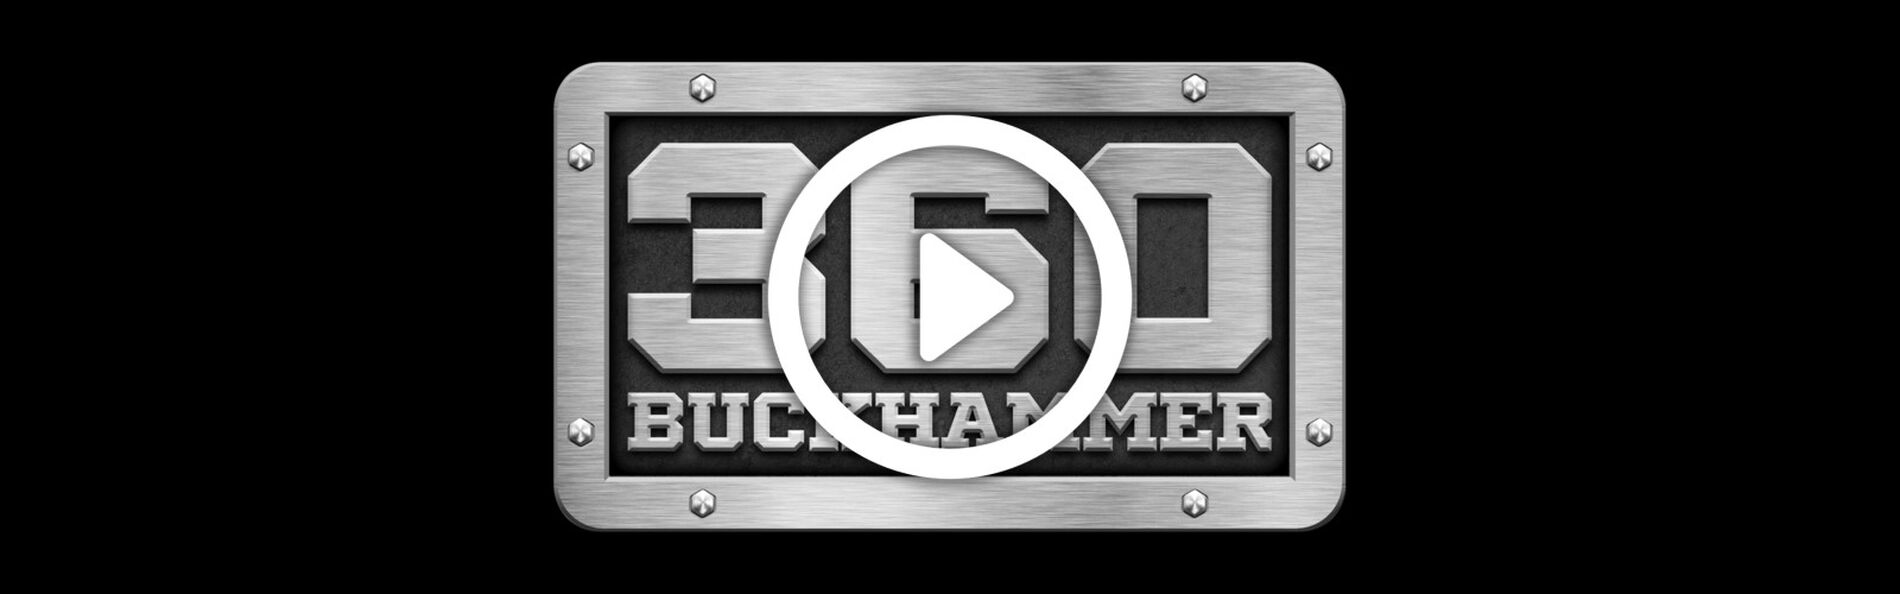 360 Buckhammer Logo on a black background with play button overlay